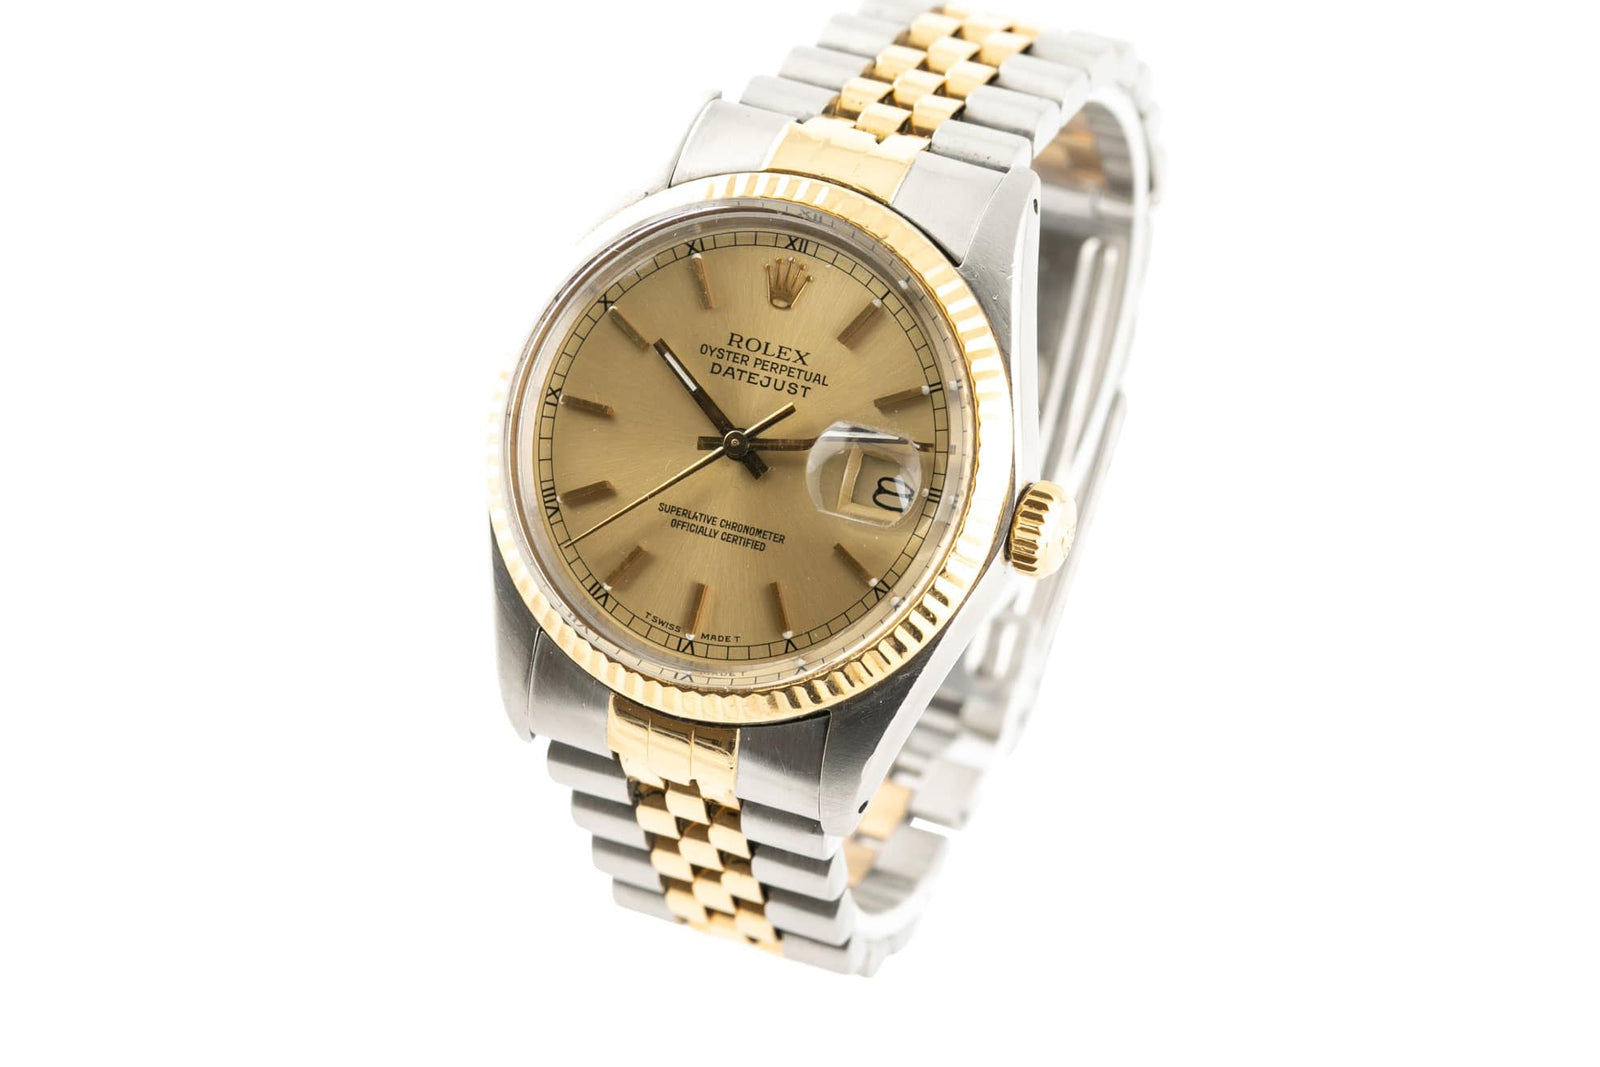 Rolex Oyster Perpetual Datejust 36  16013 - Wilson Watches 